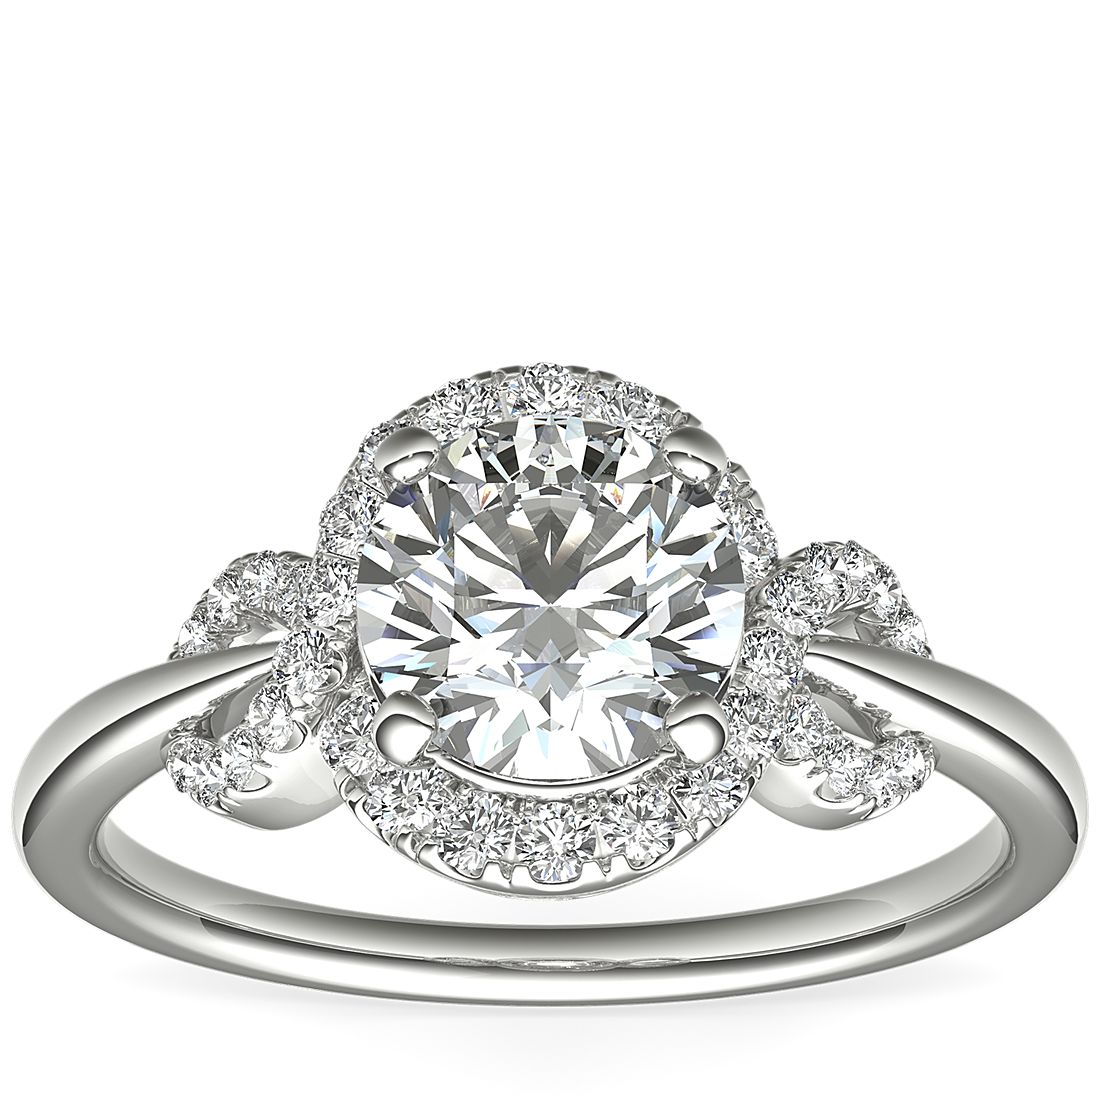 Diamond and white gold engagement ring